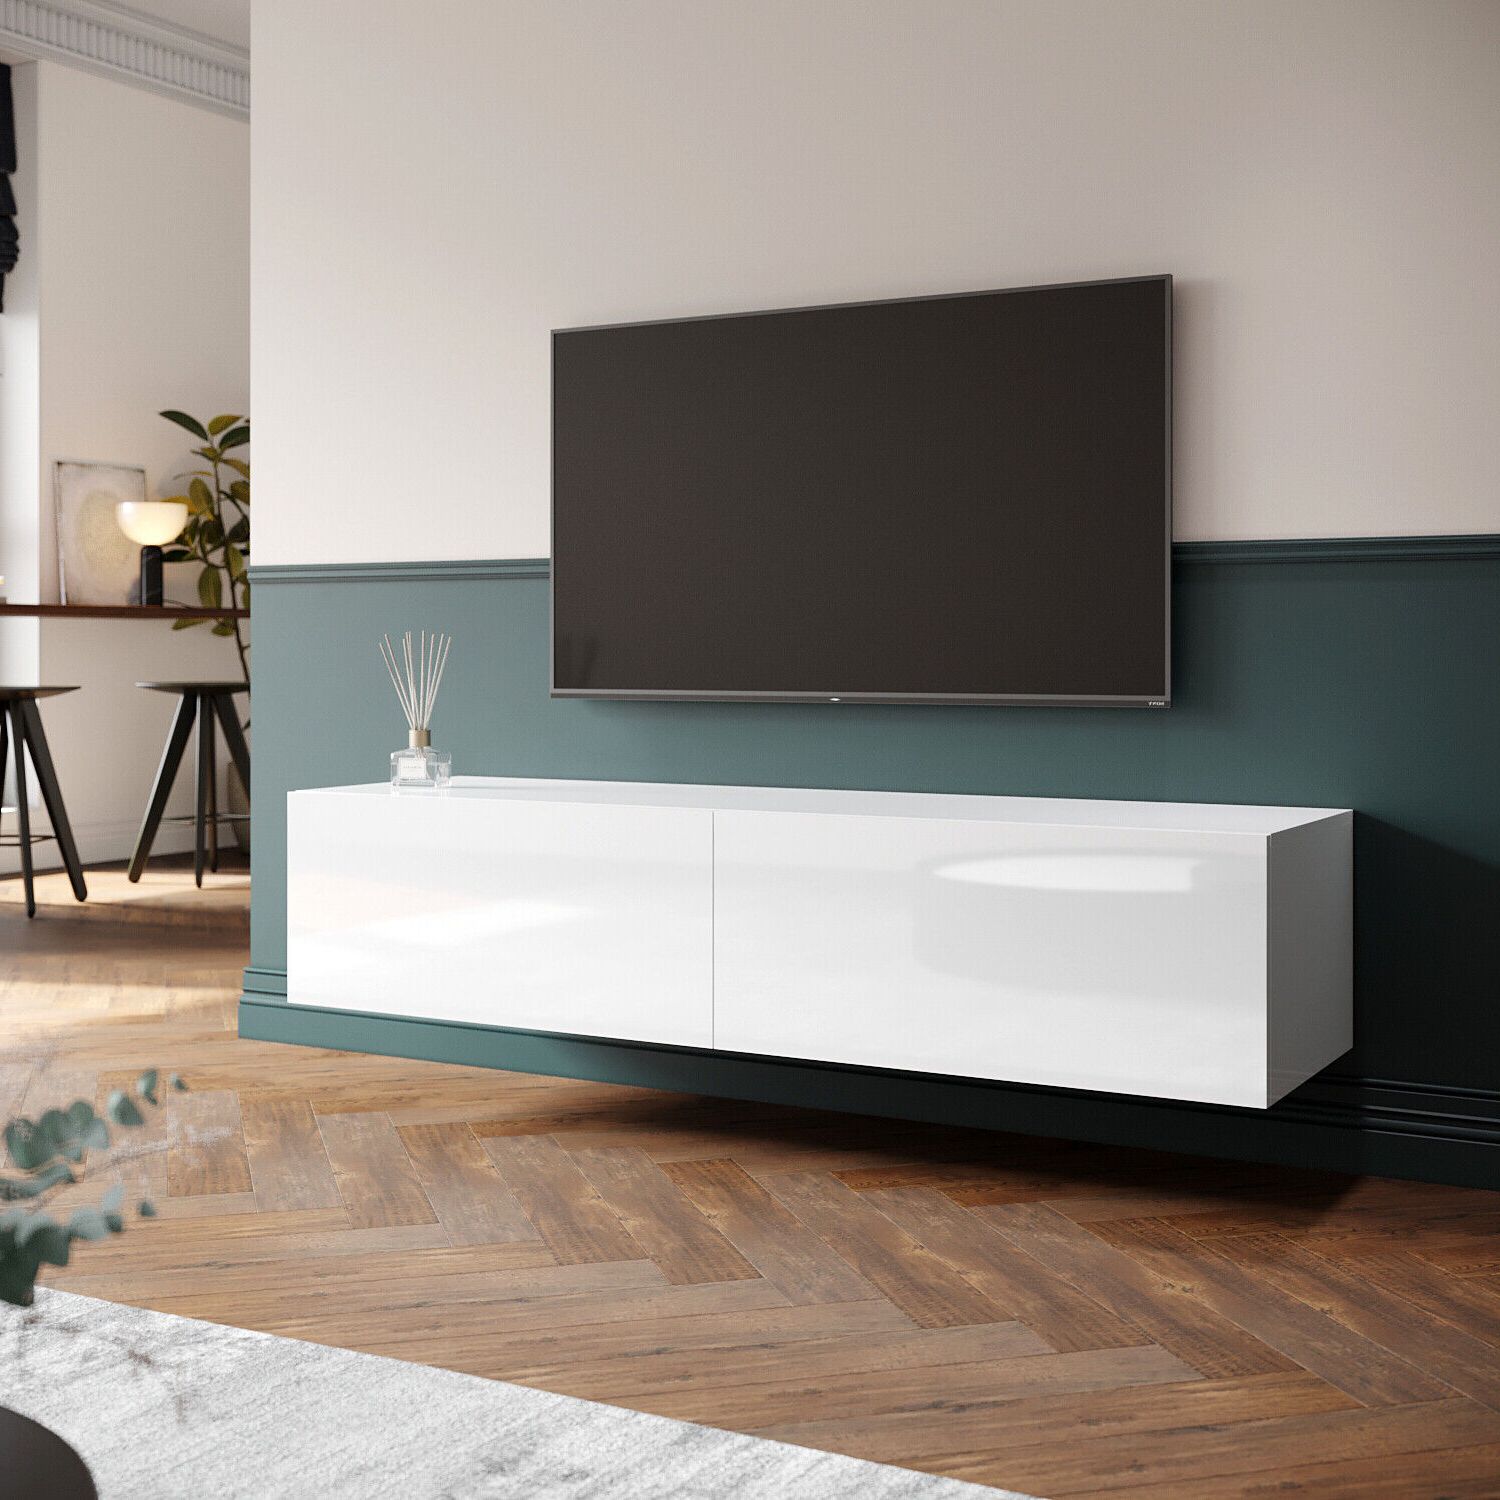 White Floating Tv Unit Cabinet Wall Mounted High Gloss Entertainment Unit  140cm | Ebay Regarding Wall Mounted Floating Tv Stands (View 3 of 20)